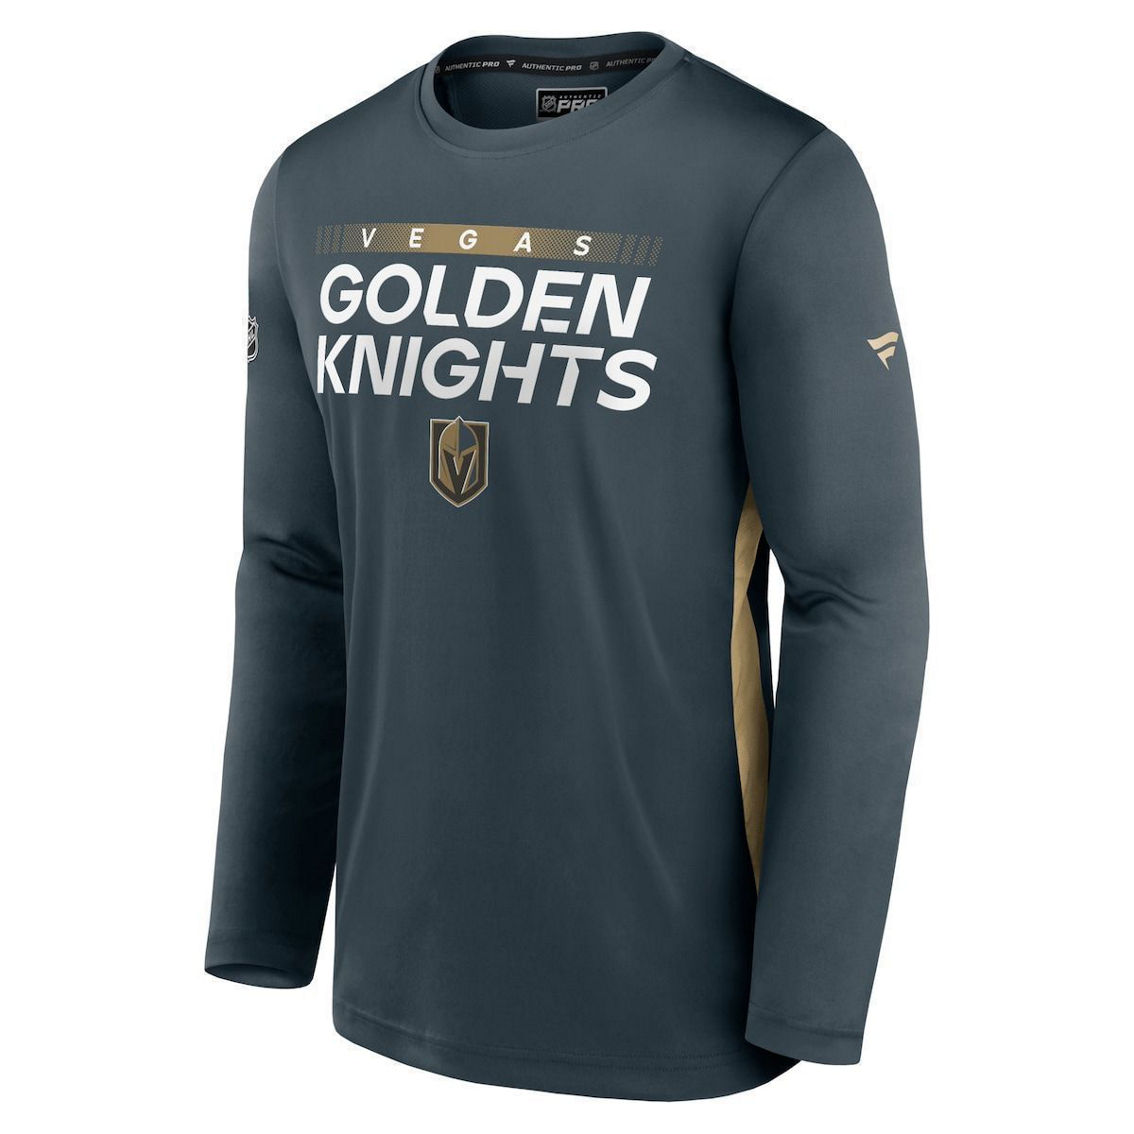 Fanatics Branded Men's Gray Vegas Golden Knights Authentic Pro Rink Performance Long Sleeve T-Shirt - Image 3 of 4